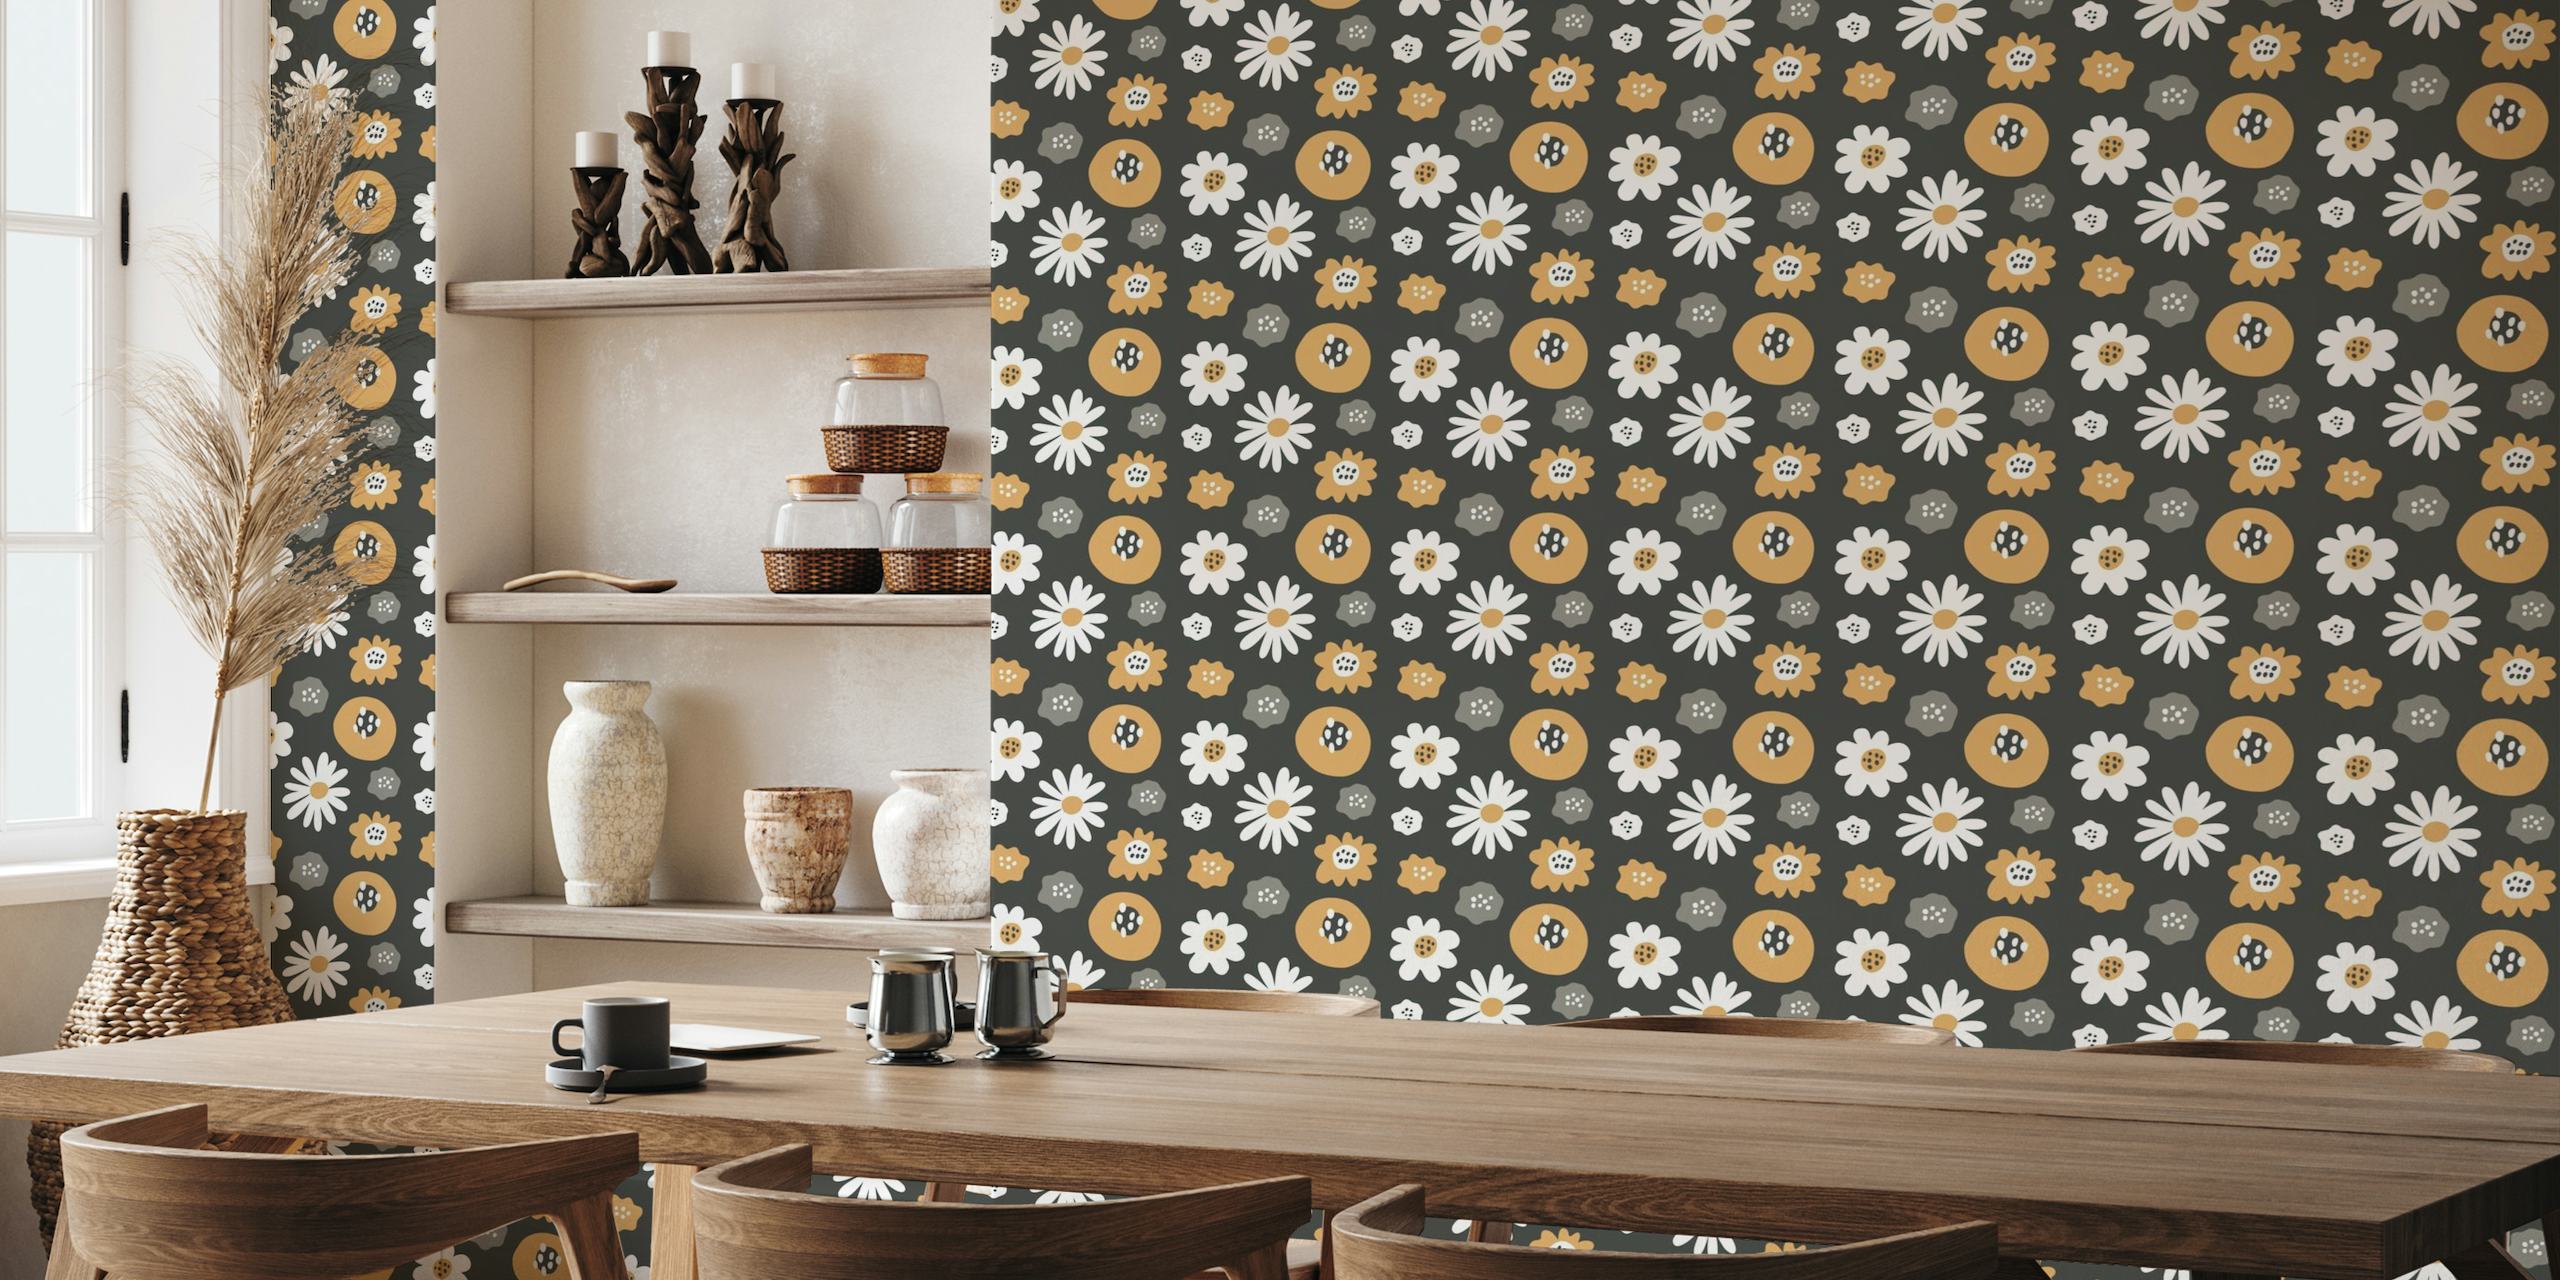 Stylized retro-patterned wall mural with autumn flowers in cream, ochre, and gray on a dark background